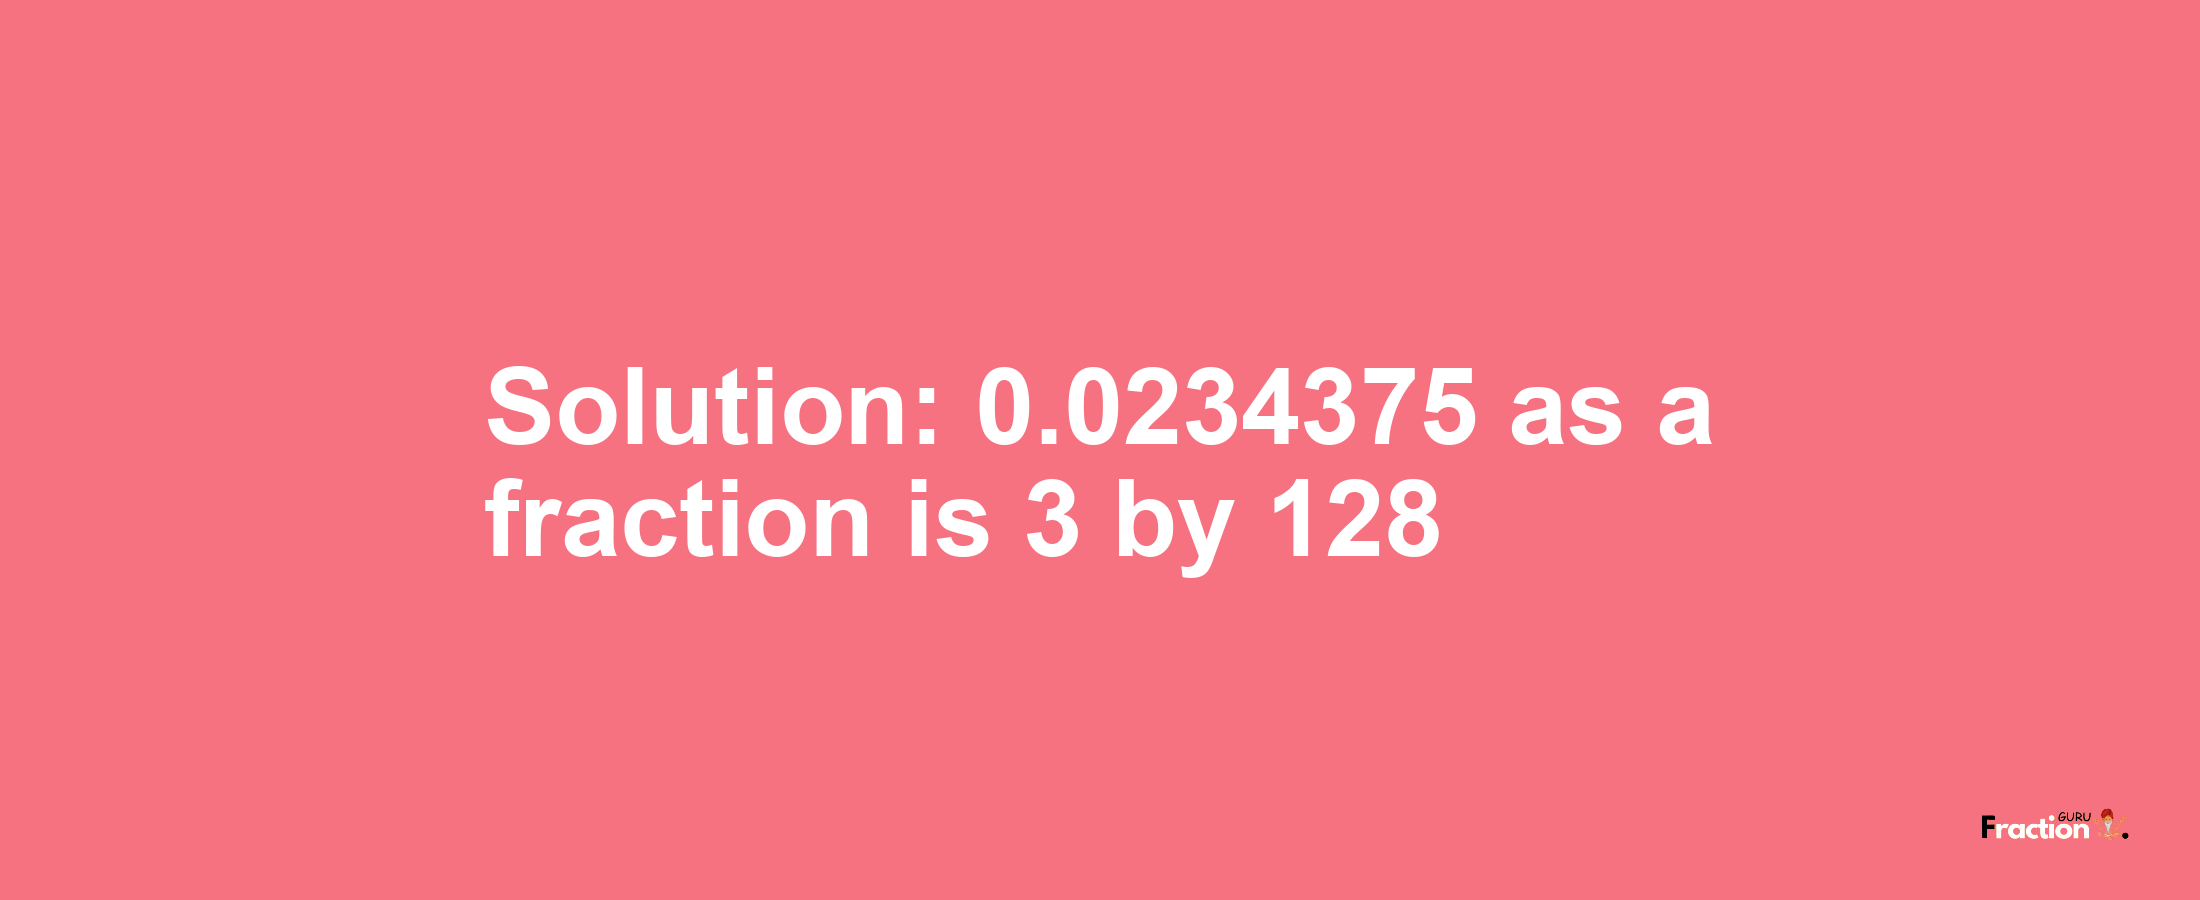 Solution:0.0234375 as a fraction is 3/128